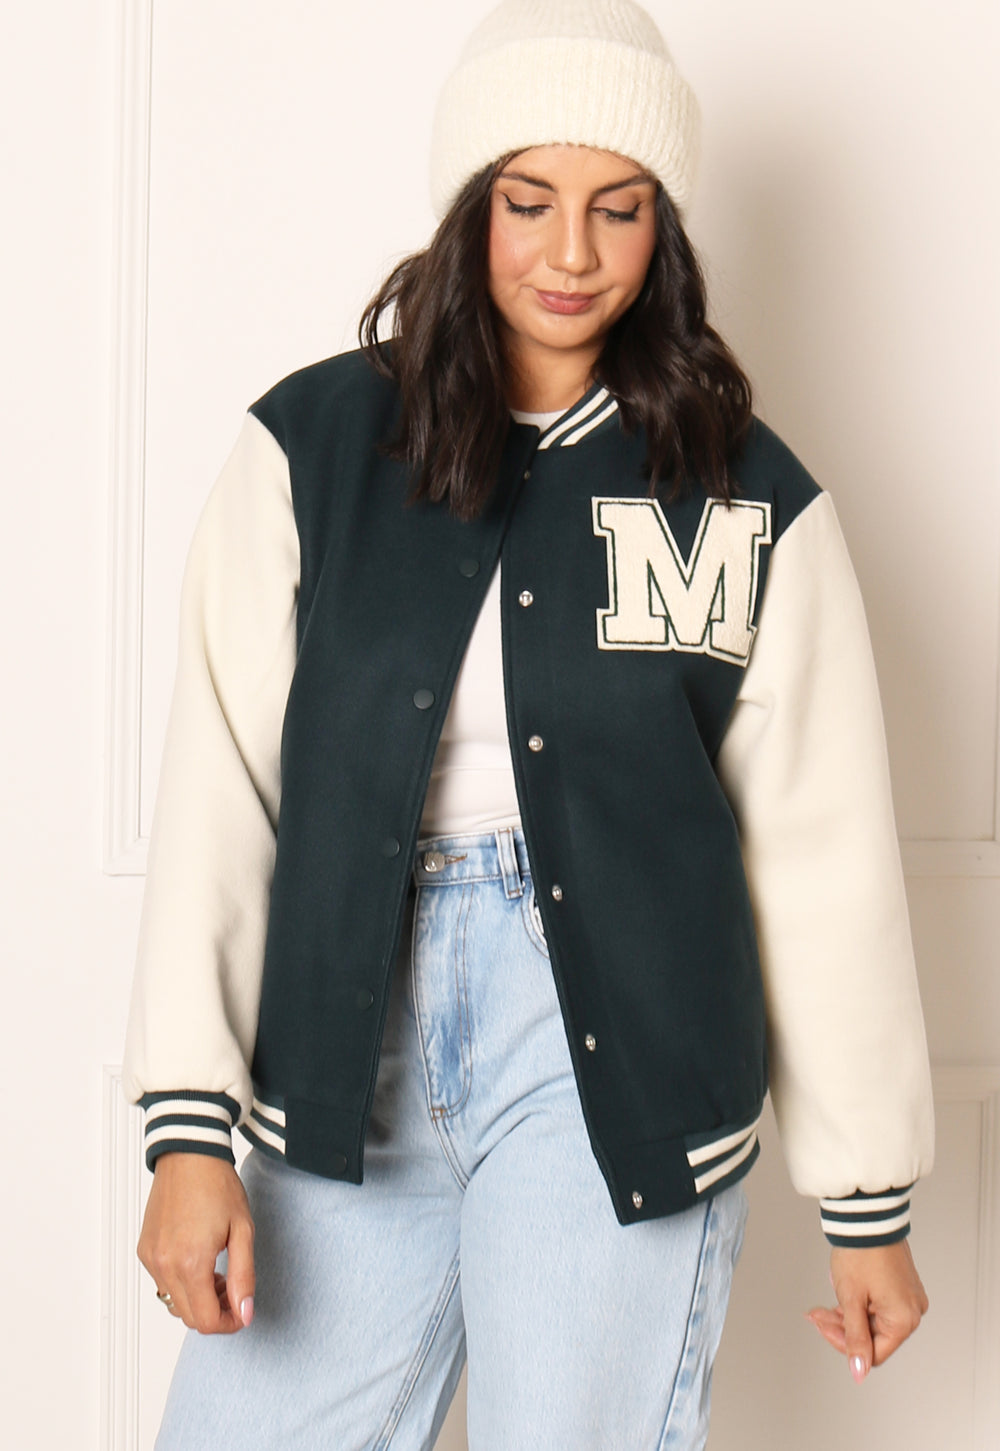 ONLY Silja Brushed Varsity Letterman Bomber Jackets in Teal Green & Cream - One Nation Clothing